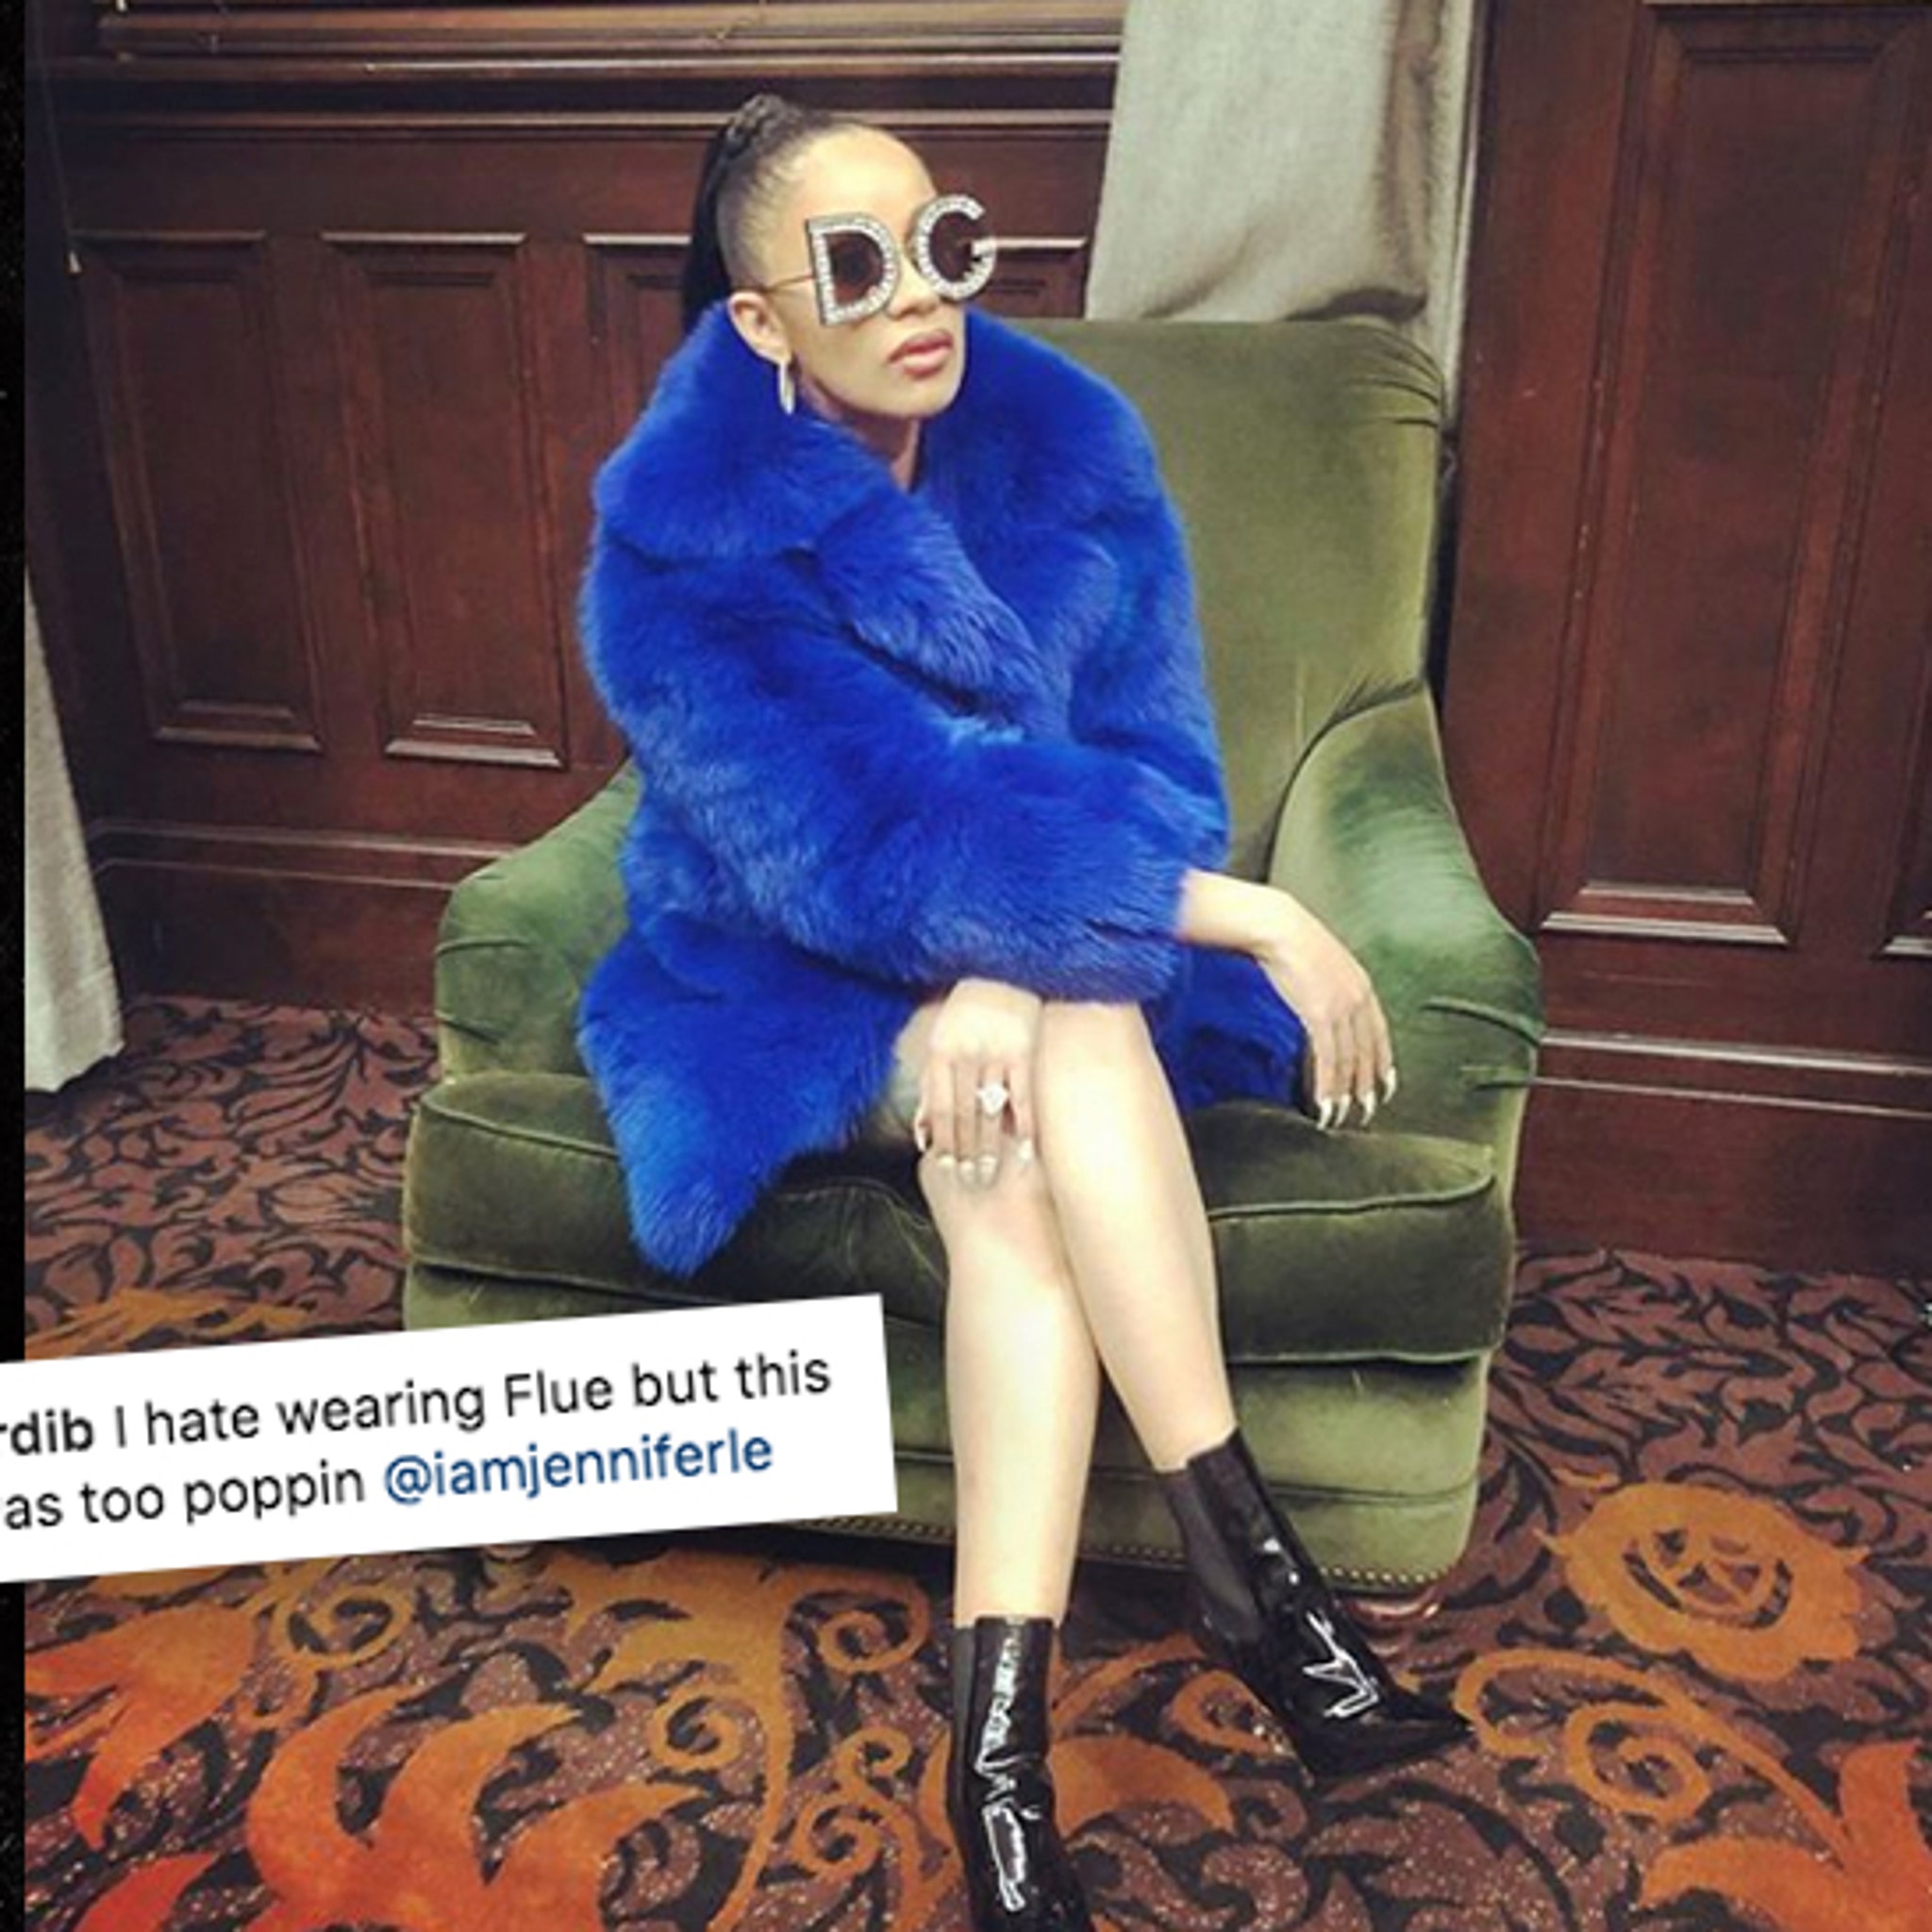 Cardi B Getting Gang Threats After IG Post Dissed Crips